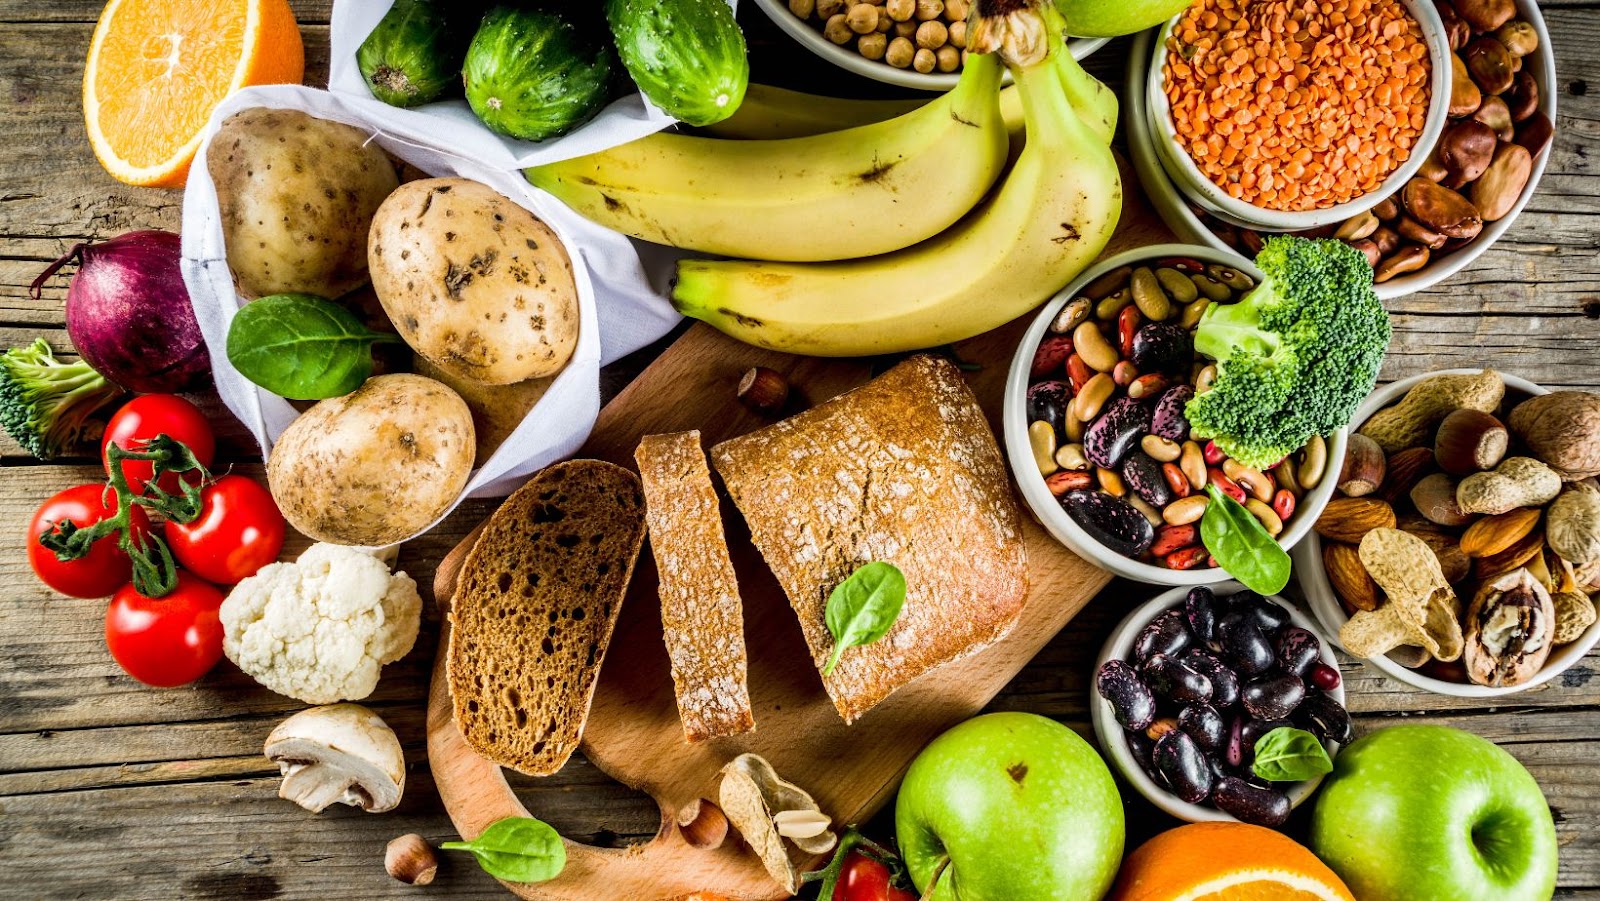 What Are The Risks Associated With Consuming Too Many Carbohydrates?